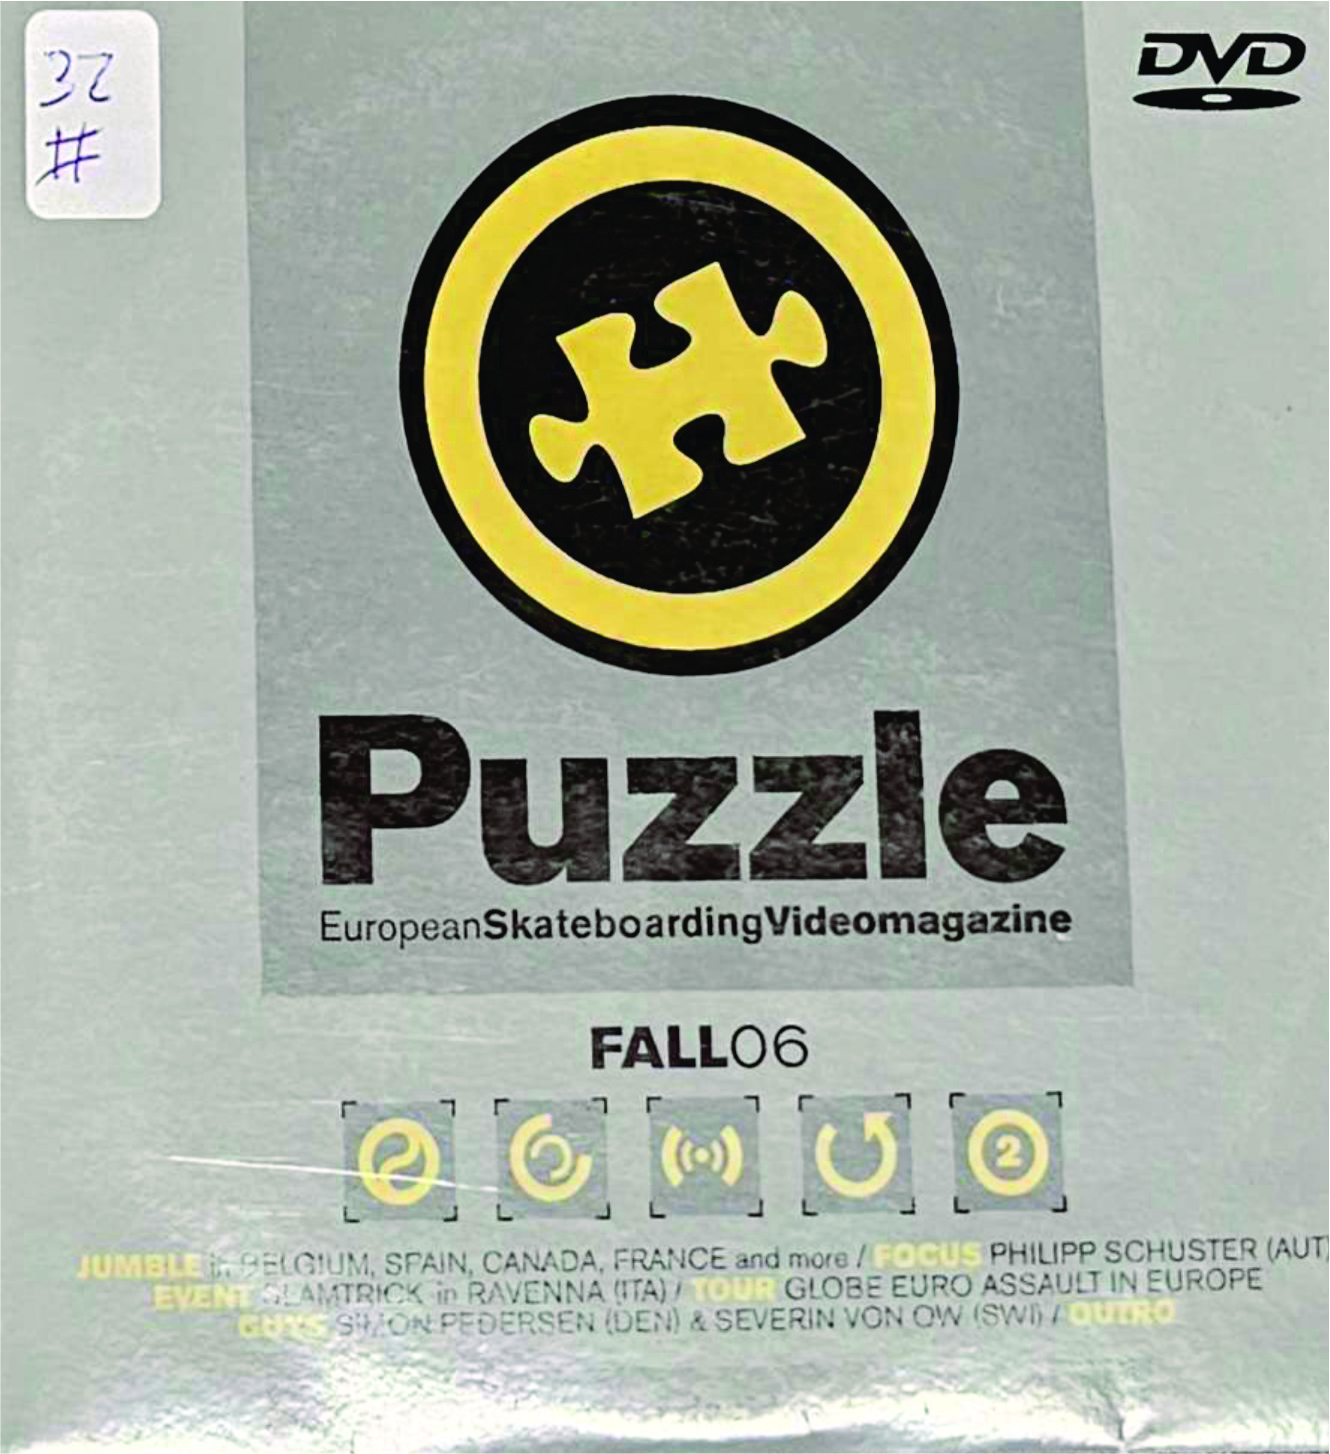 Puzzle Video - Fall 2006 cover